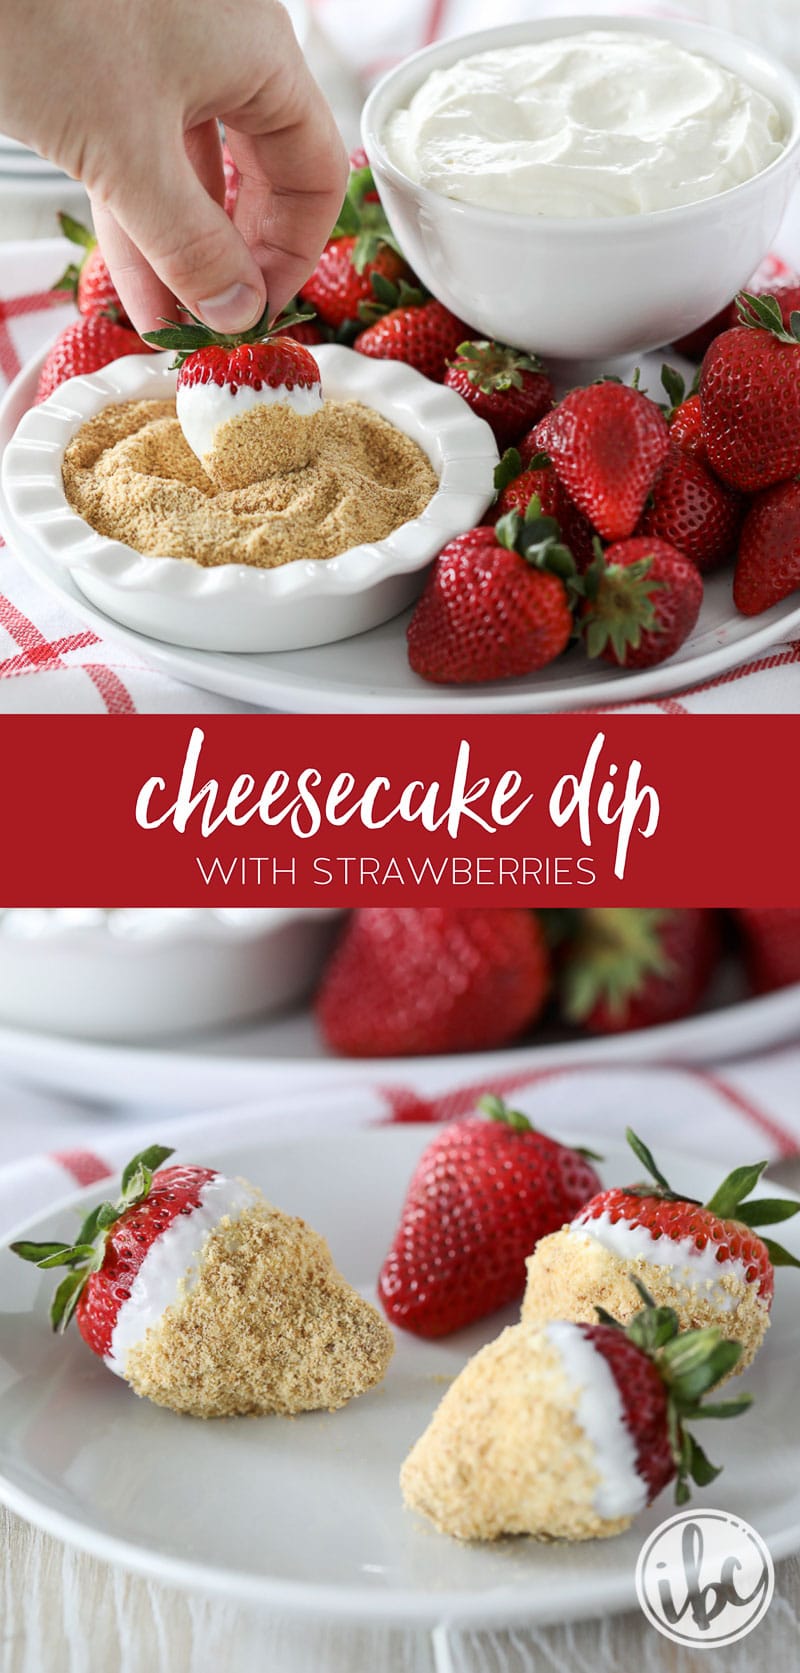 Cheesecake Dip with Strawberries - a fun and delicious way to eat dessert! #cheesecake #dip #strawberries #dessert #recipe #cheesecakedip #summer #picnic